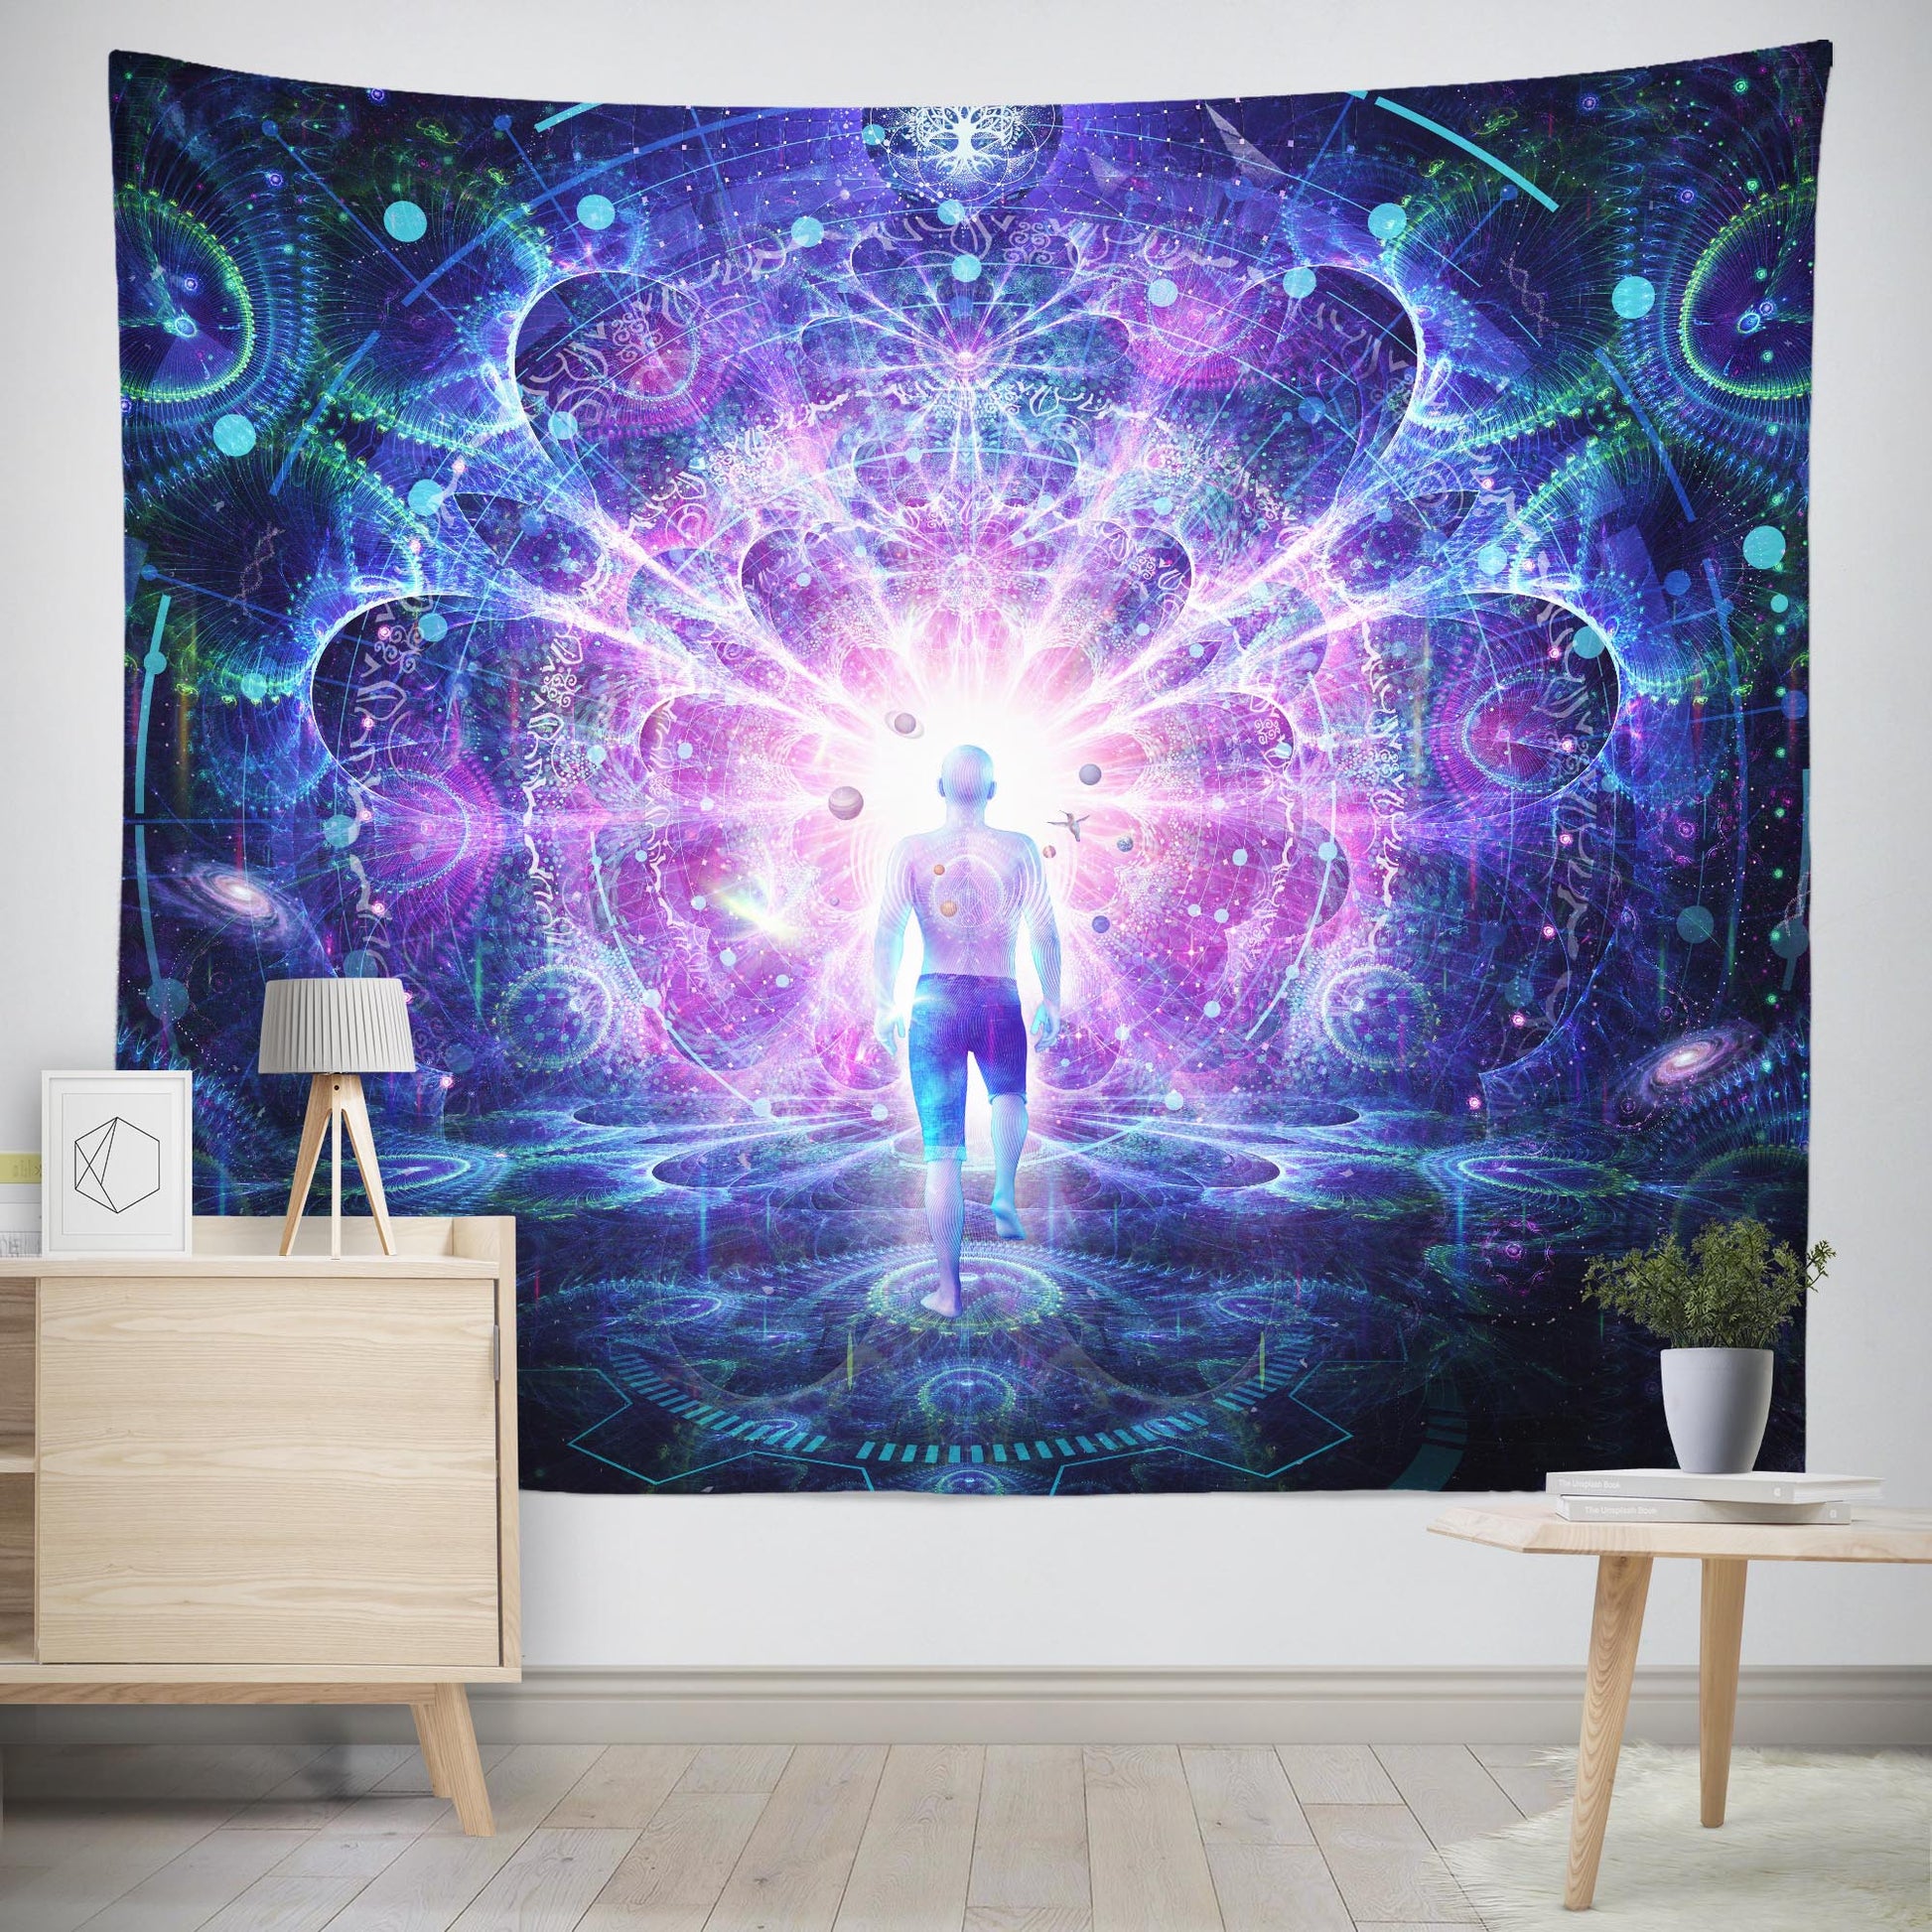 Extra large trippy psychedelic wall tapestry